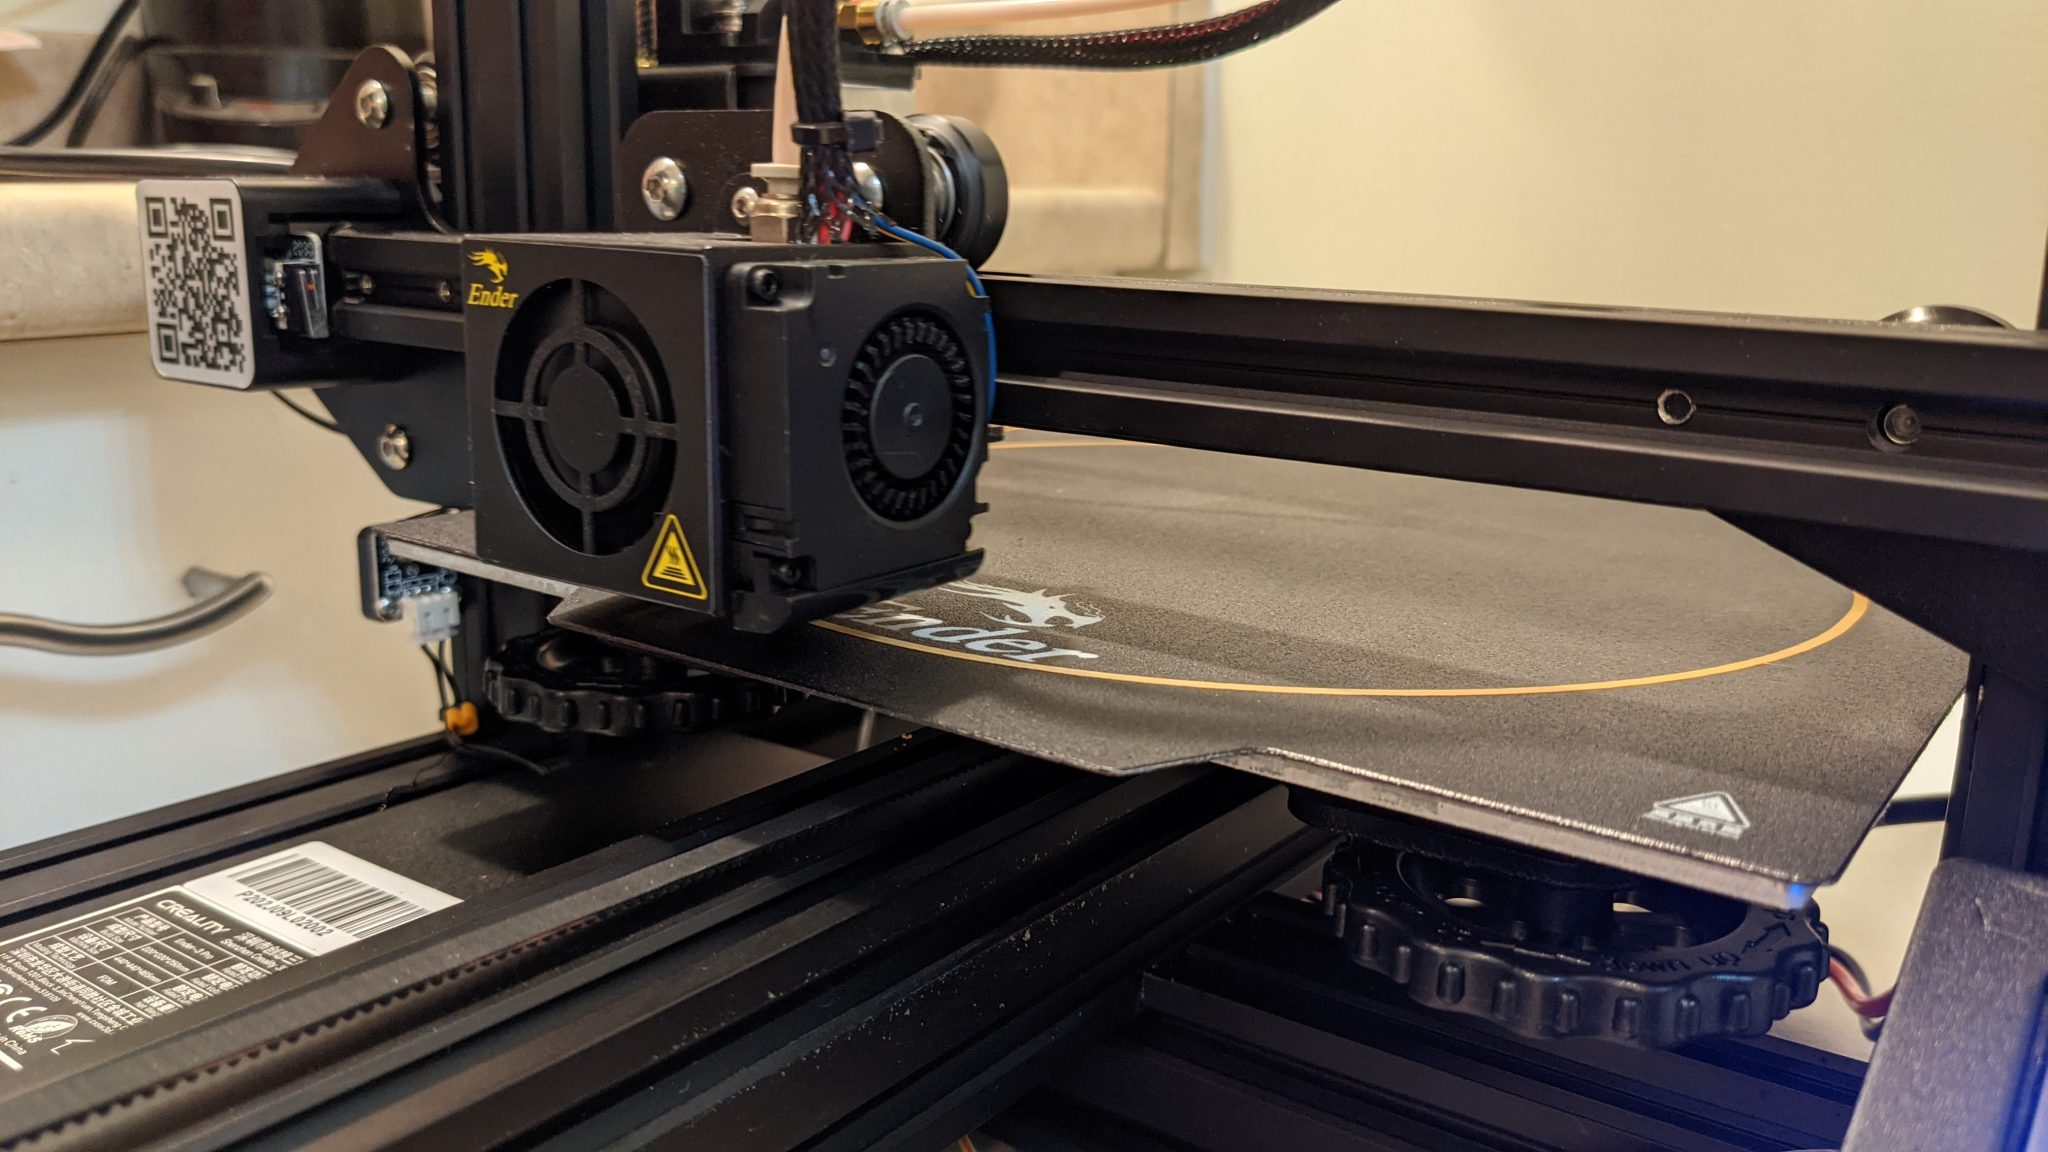 3D Printer at the beginning of a print